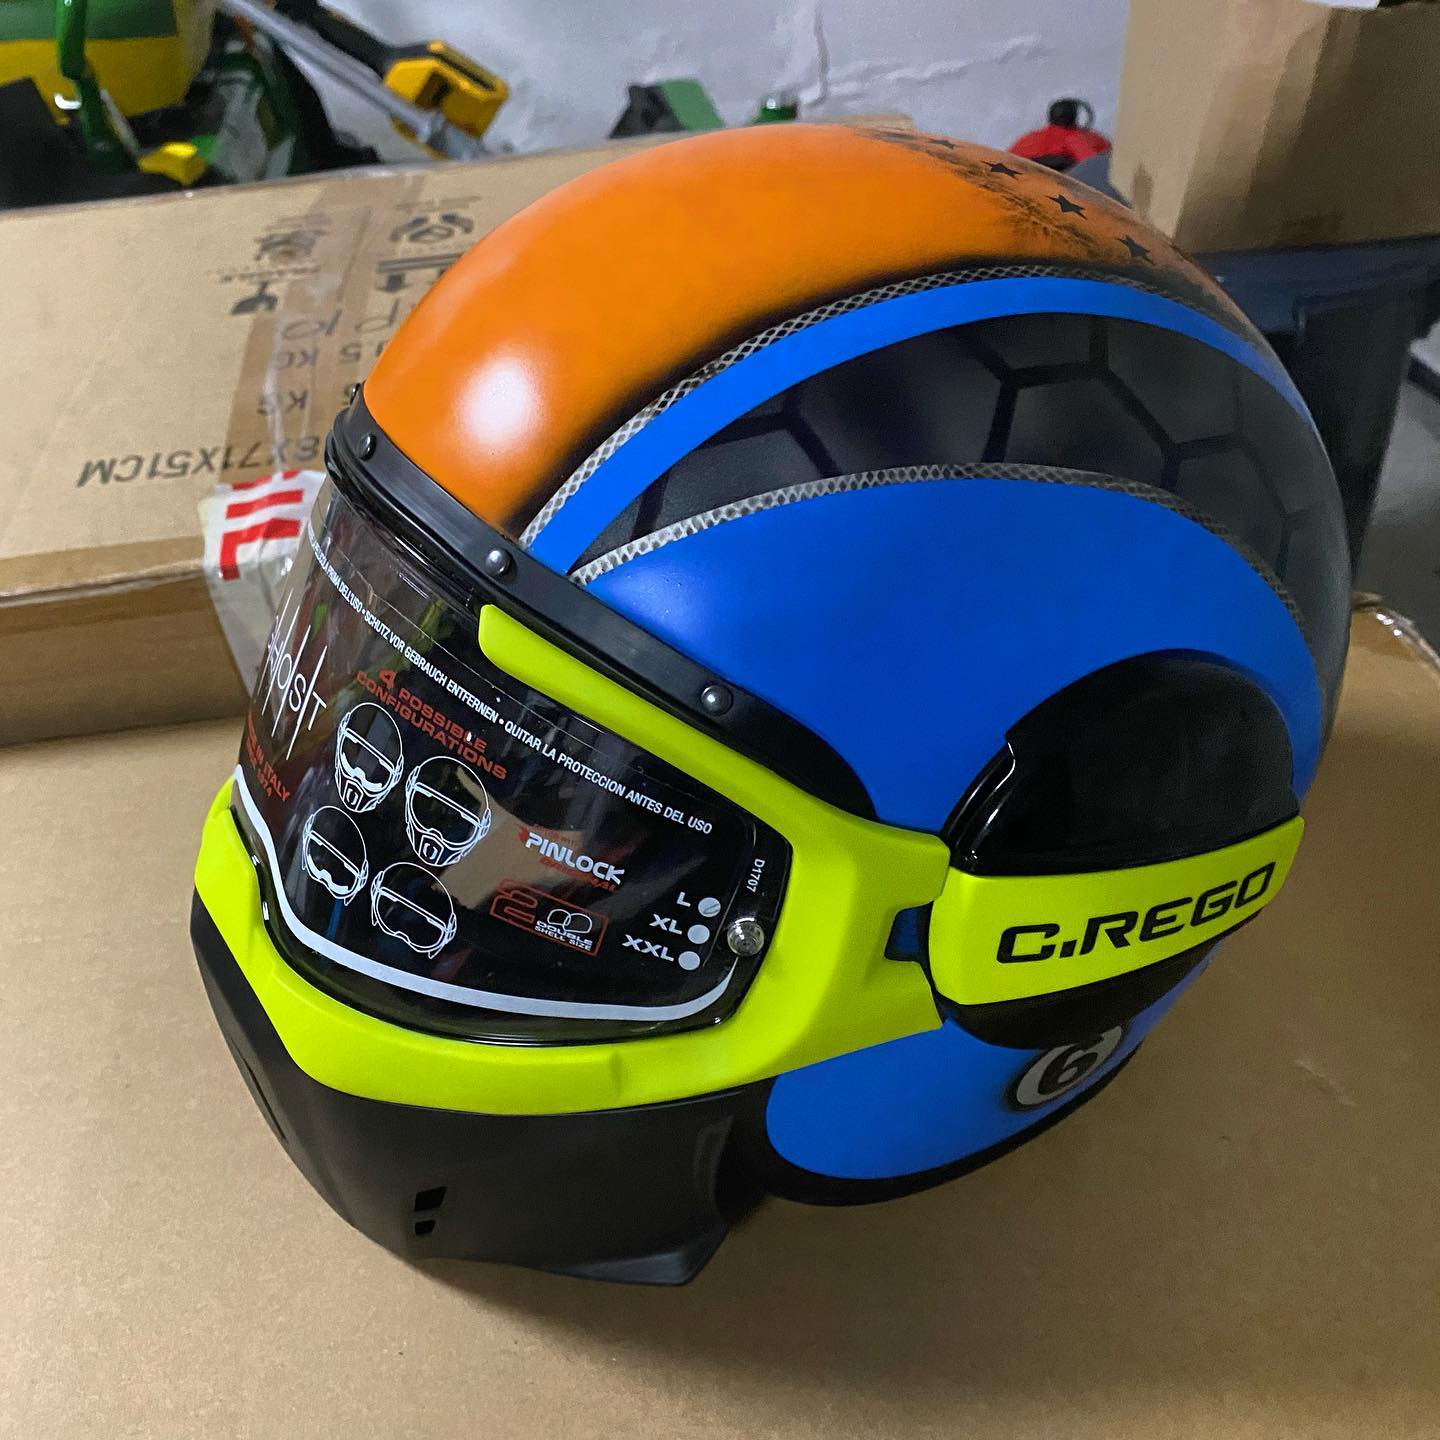 XMAS came earlier!!, what an outstanding helmet paintjob to match my bike